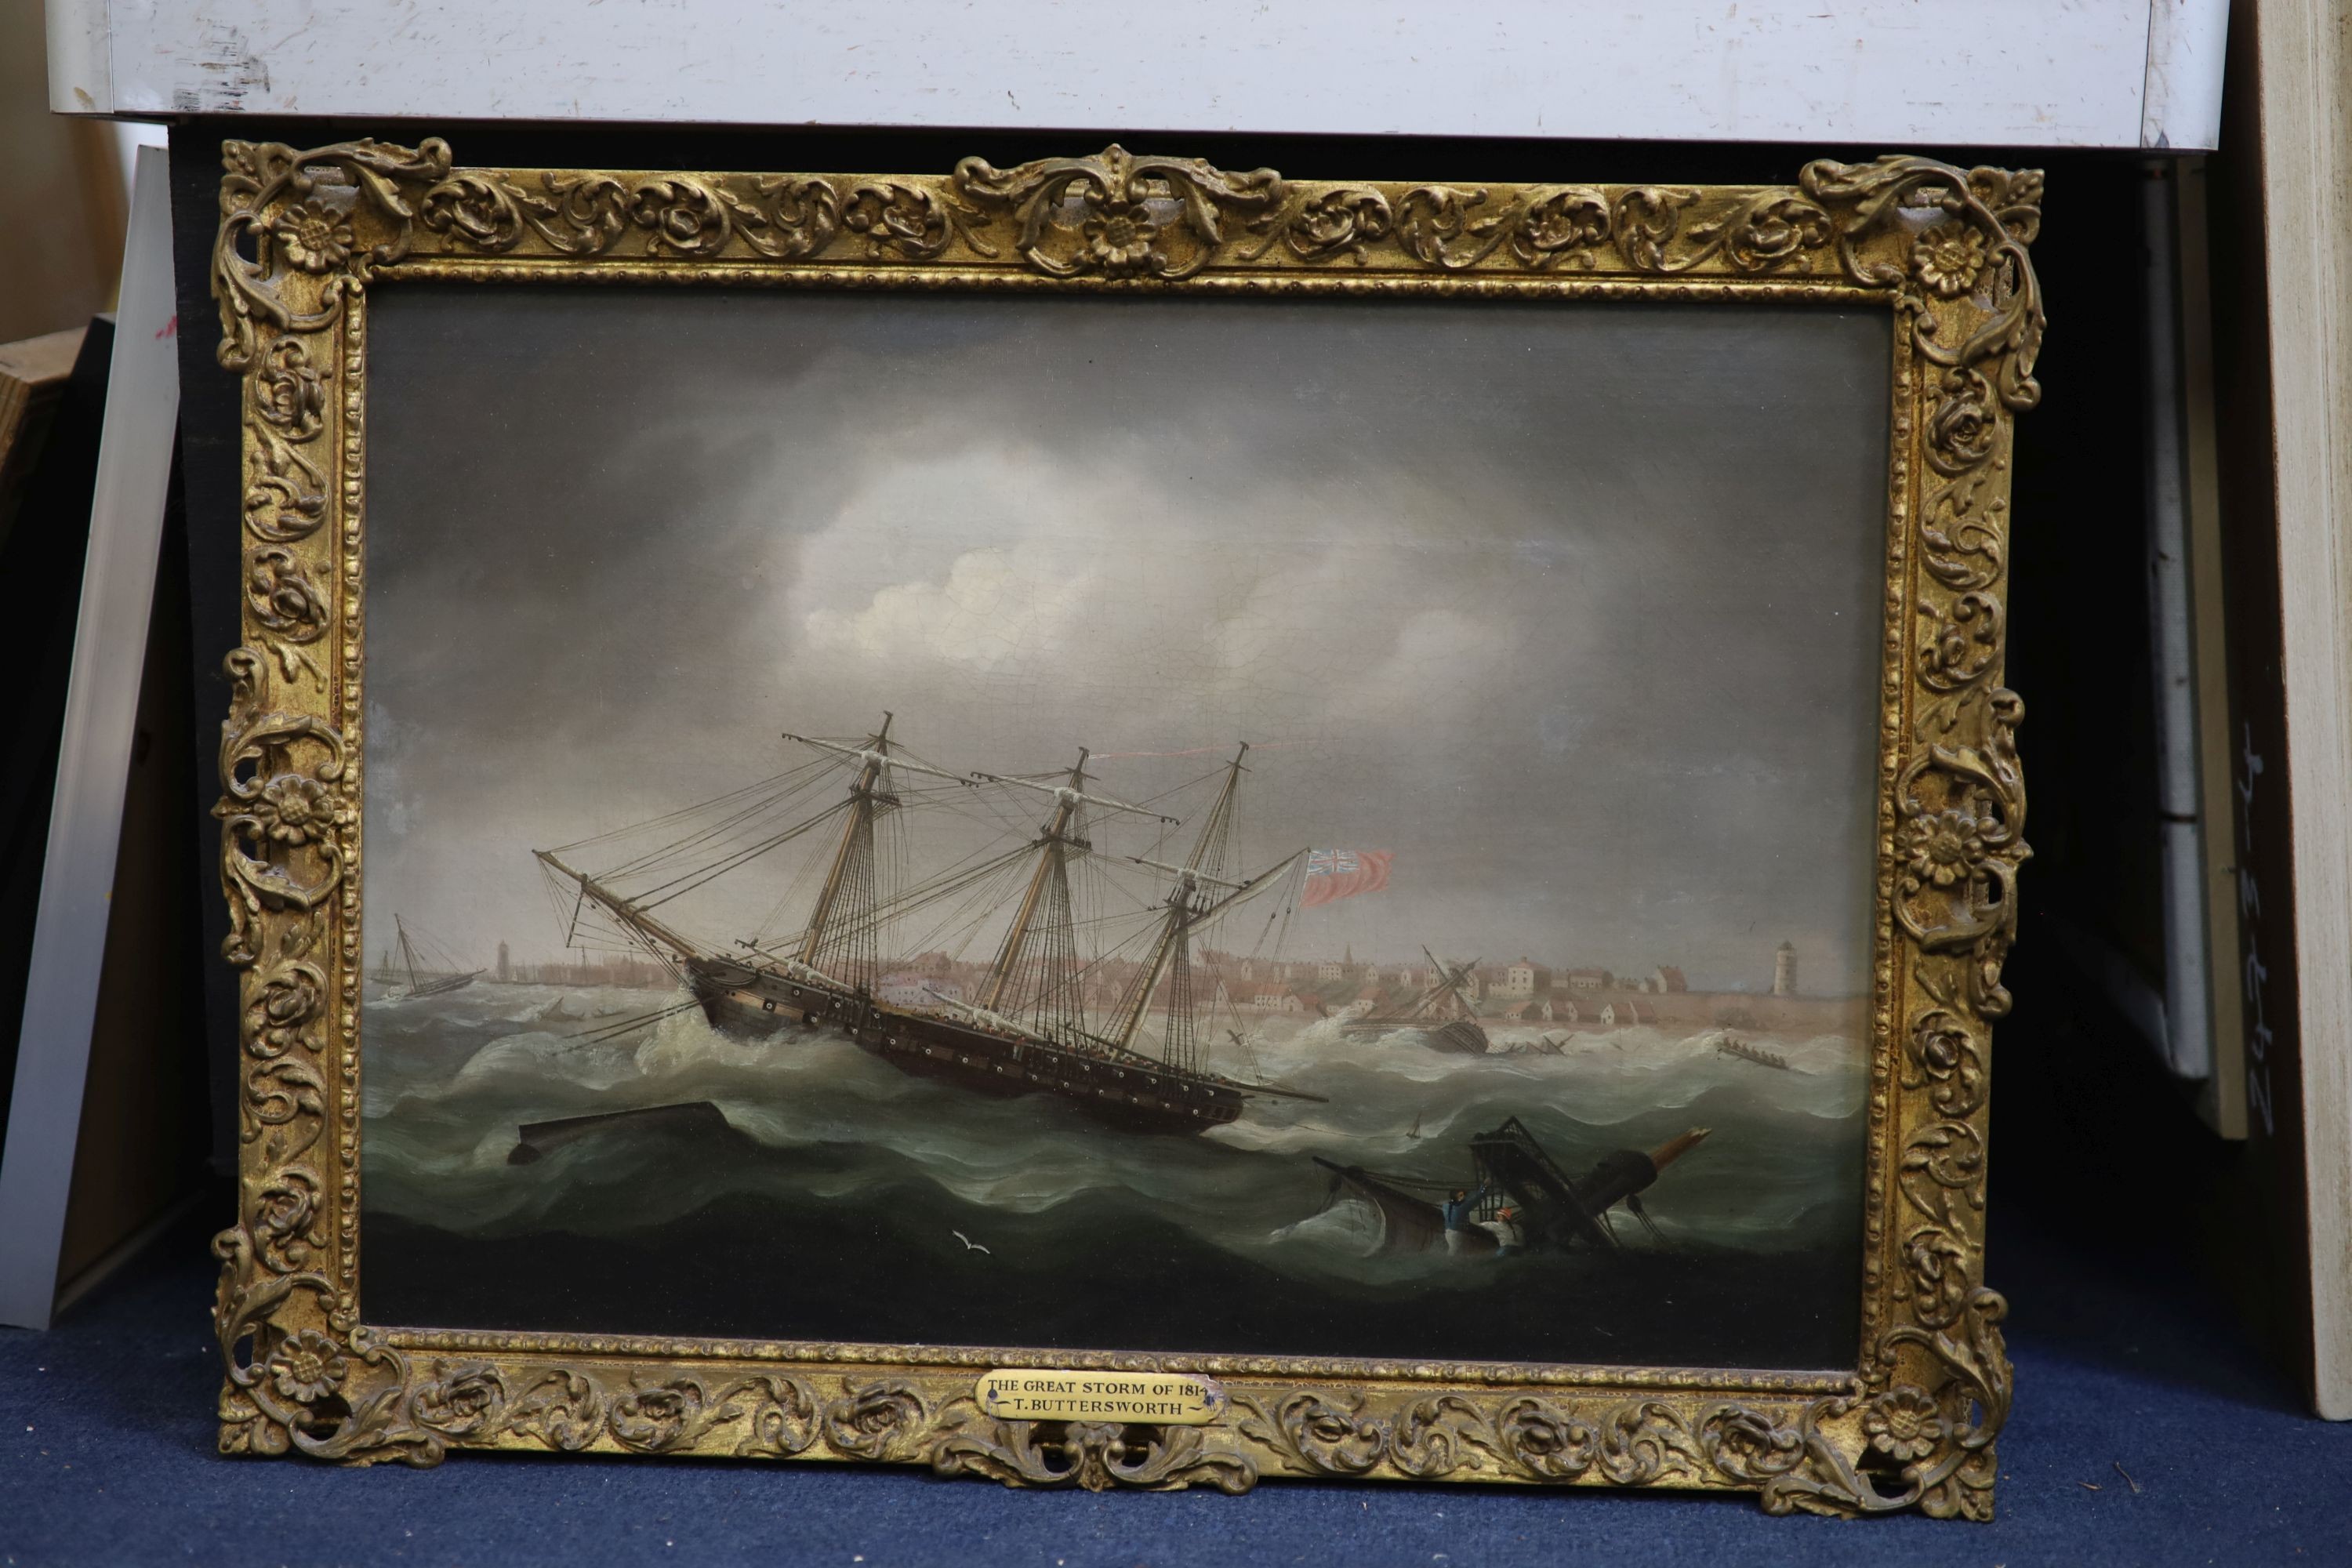 Thomas Buttersworth (1768-1842), The Great Storm of 1814, oil on canvas, 29.5 x 42cm